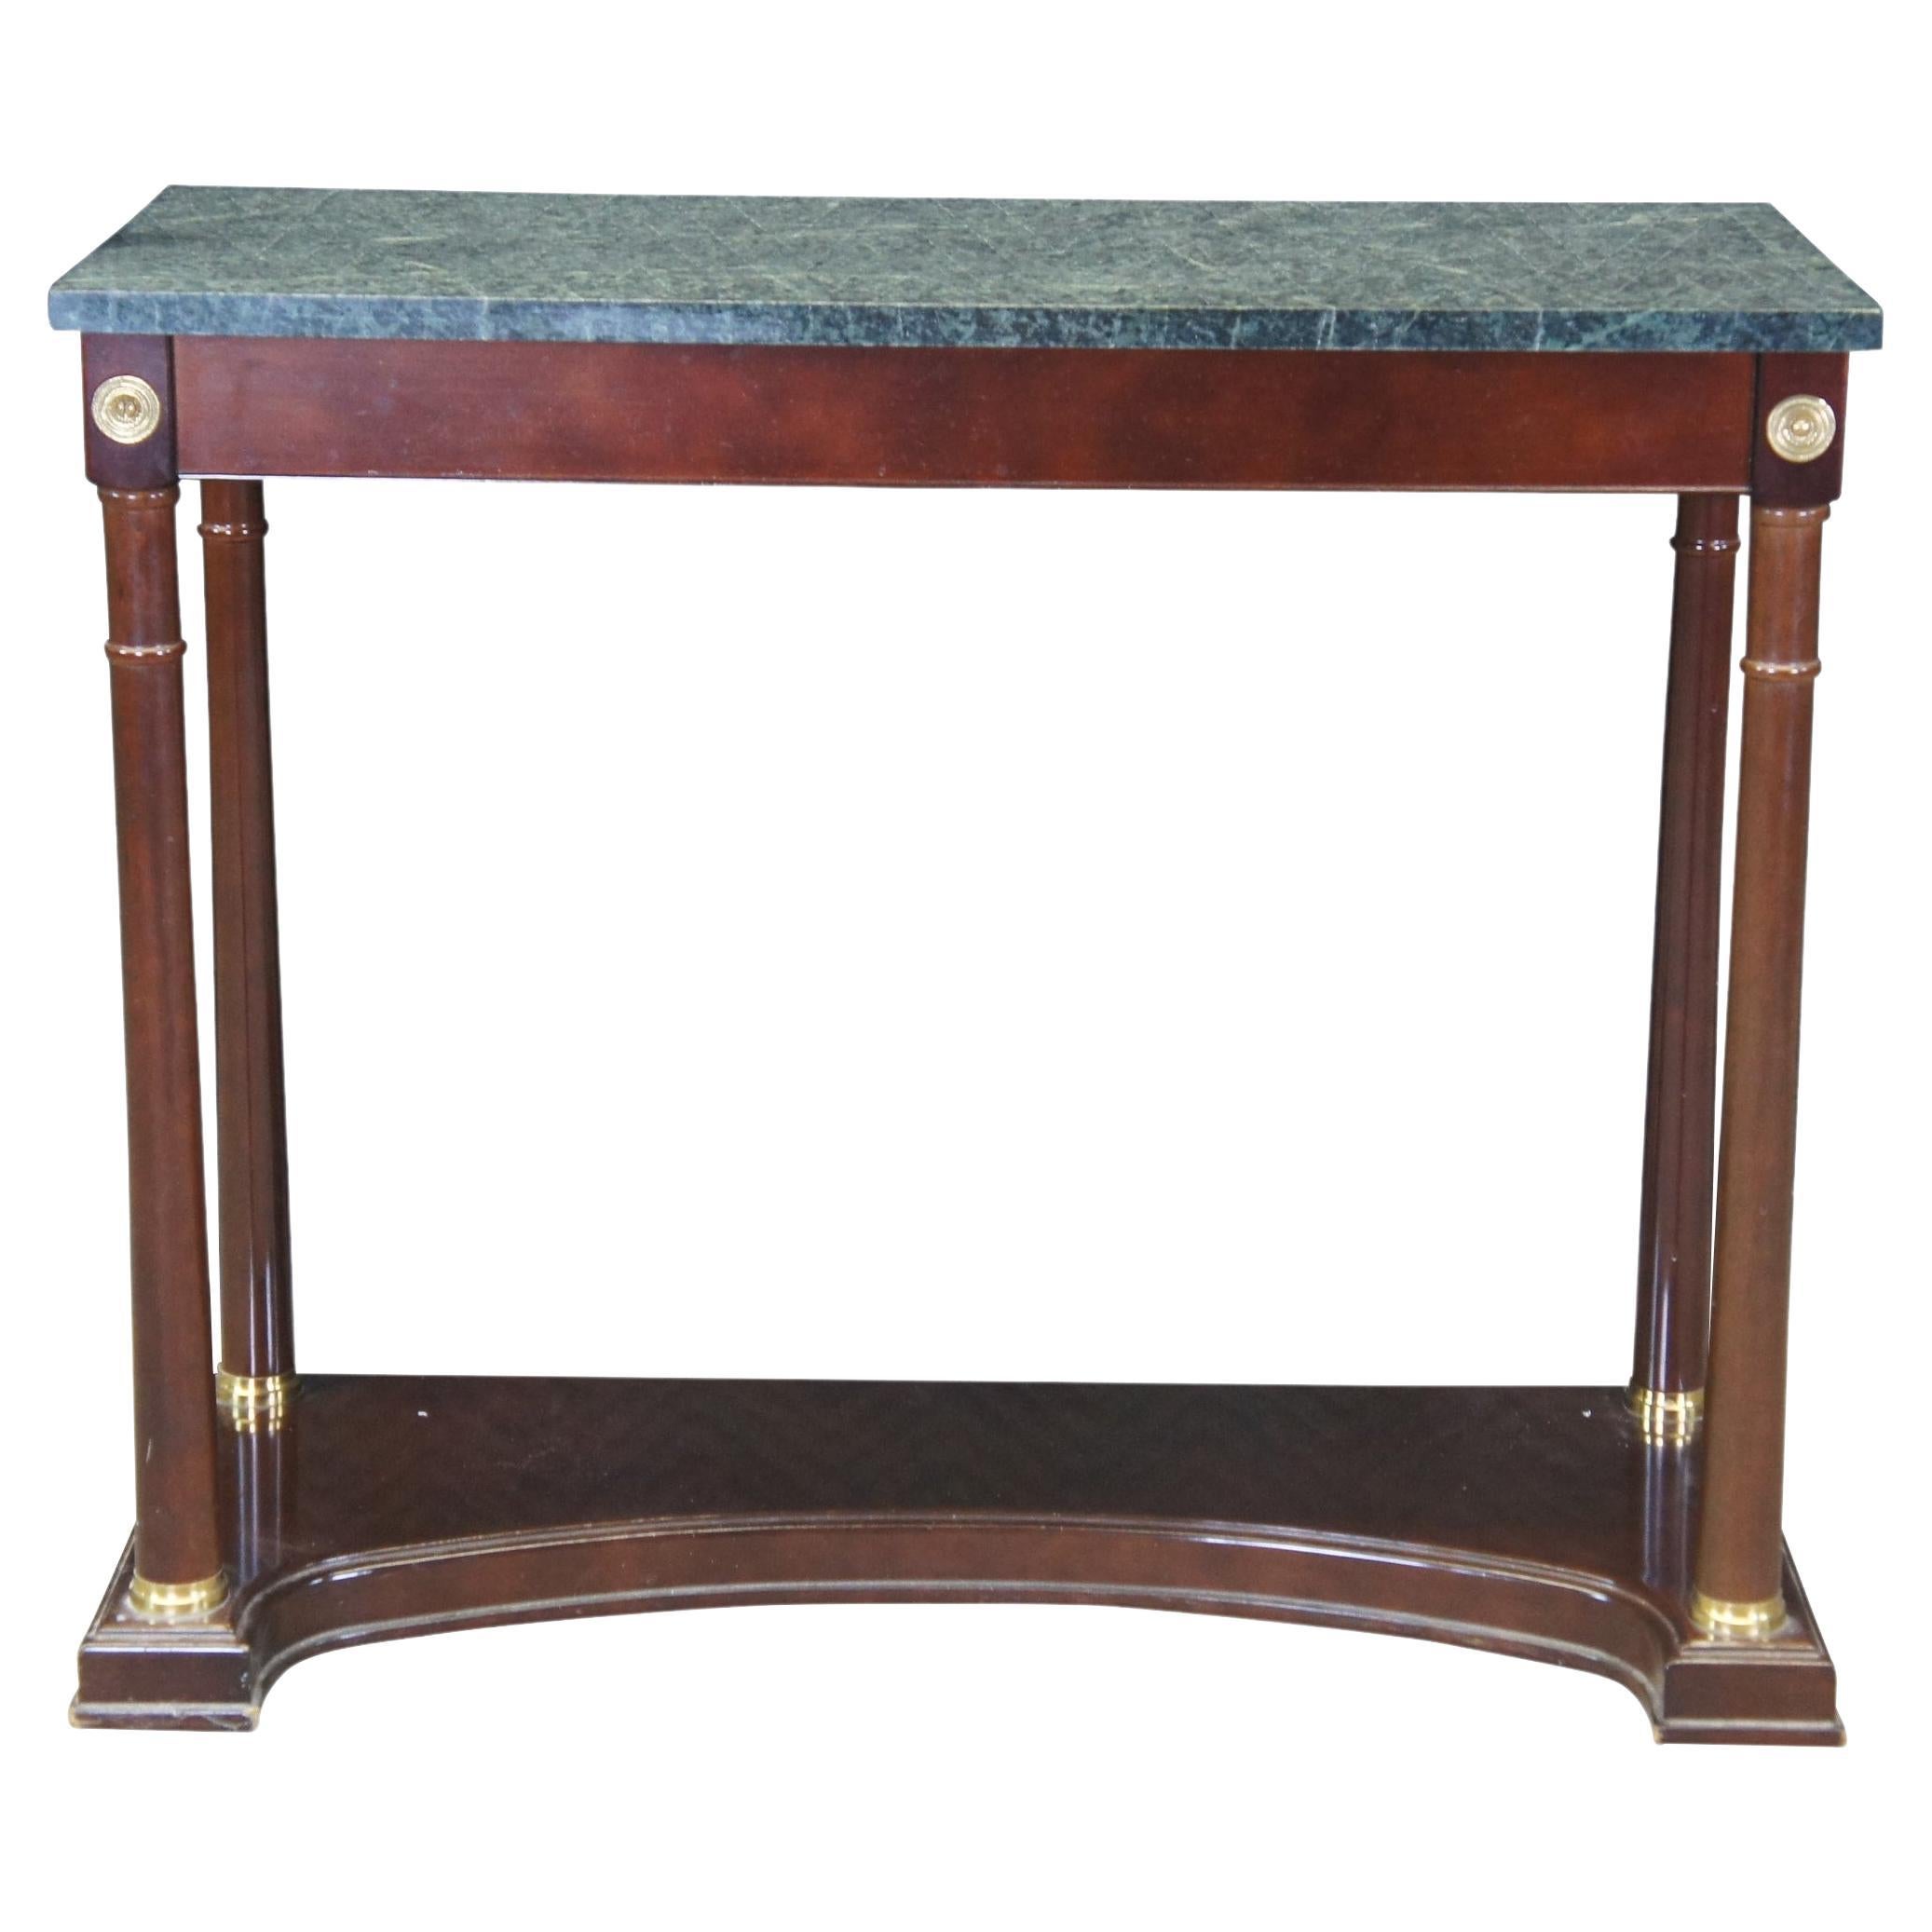 Bombay Co. Neoclassical Empire Style Mahogany Marble Top Foyer Console Table